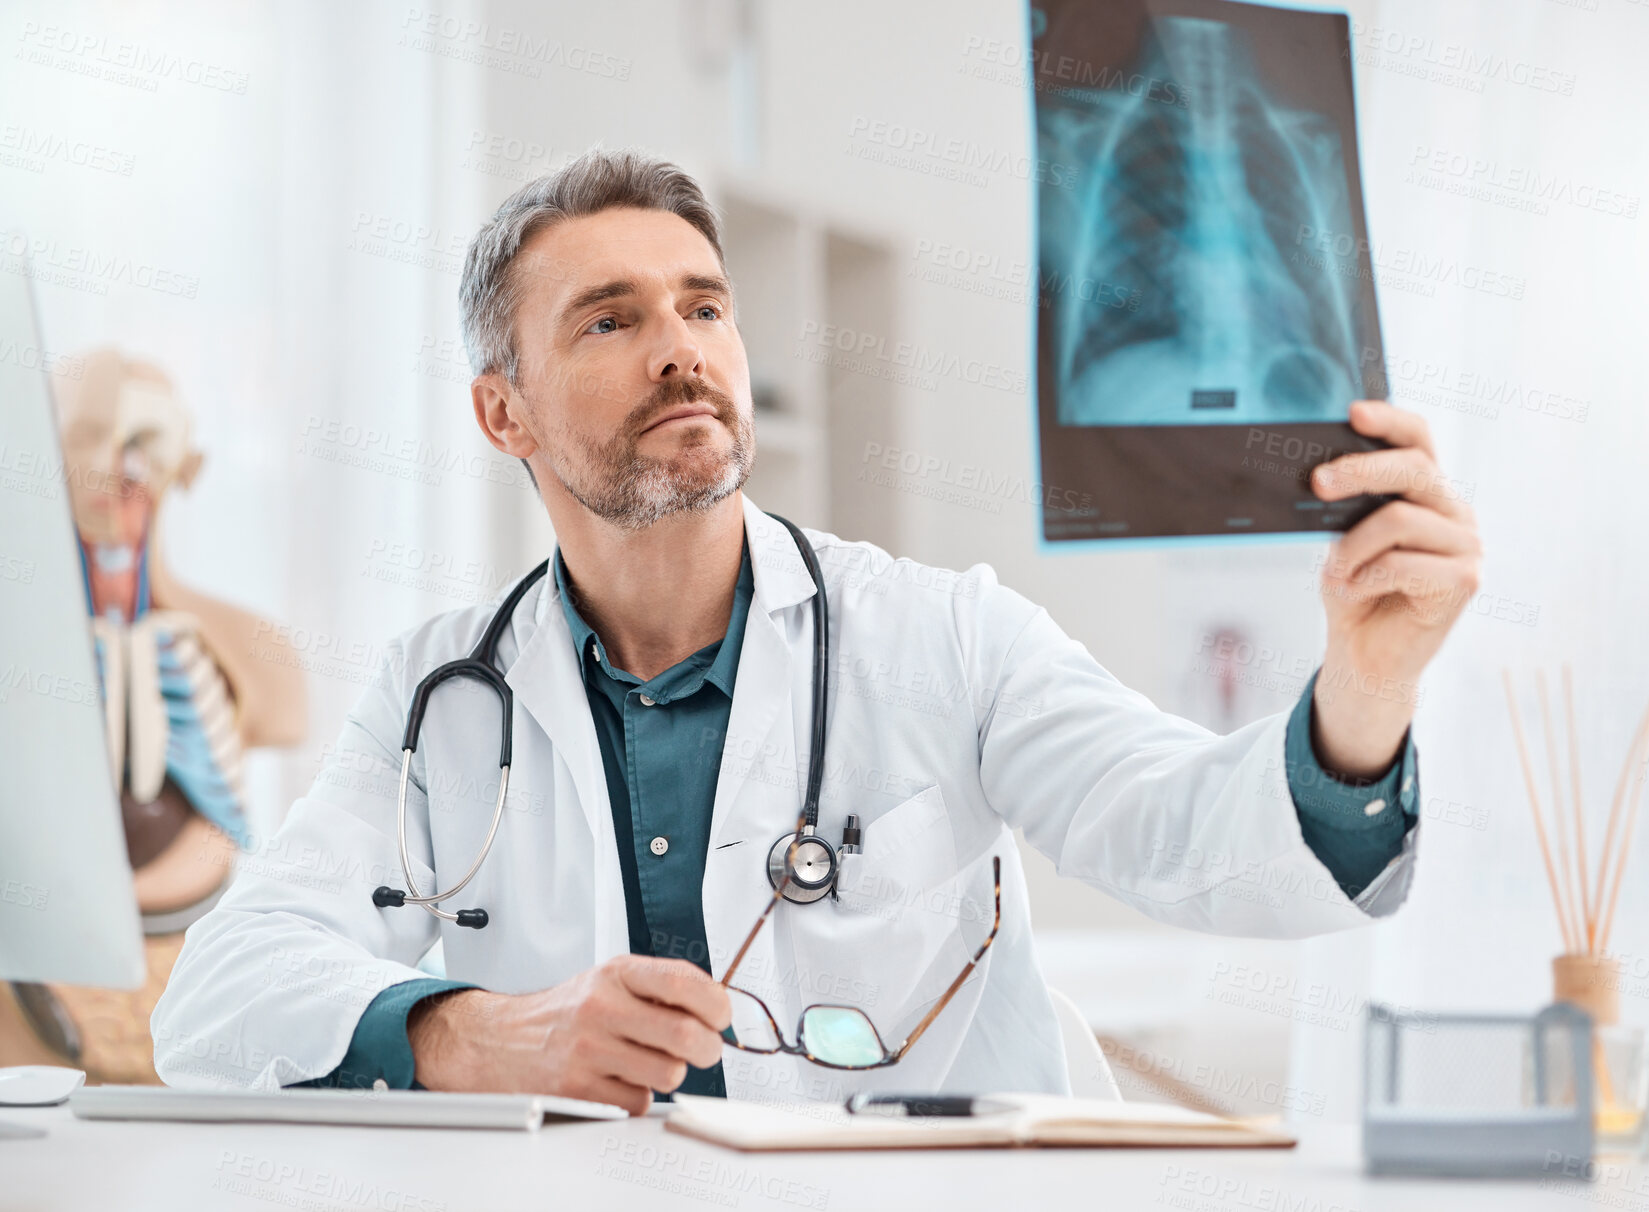 Buy stock photo Shot of a mature doctor analysing x-ray scans in a medical office